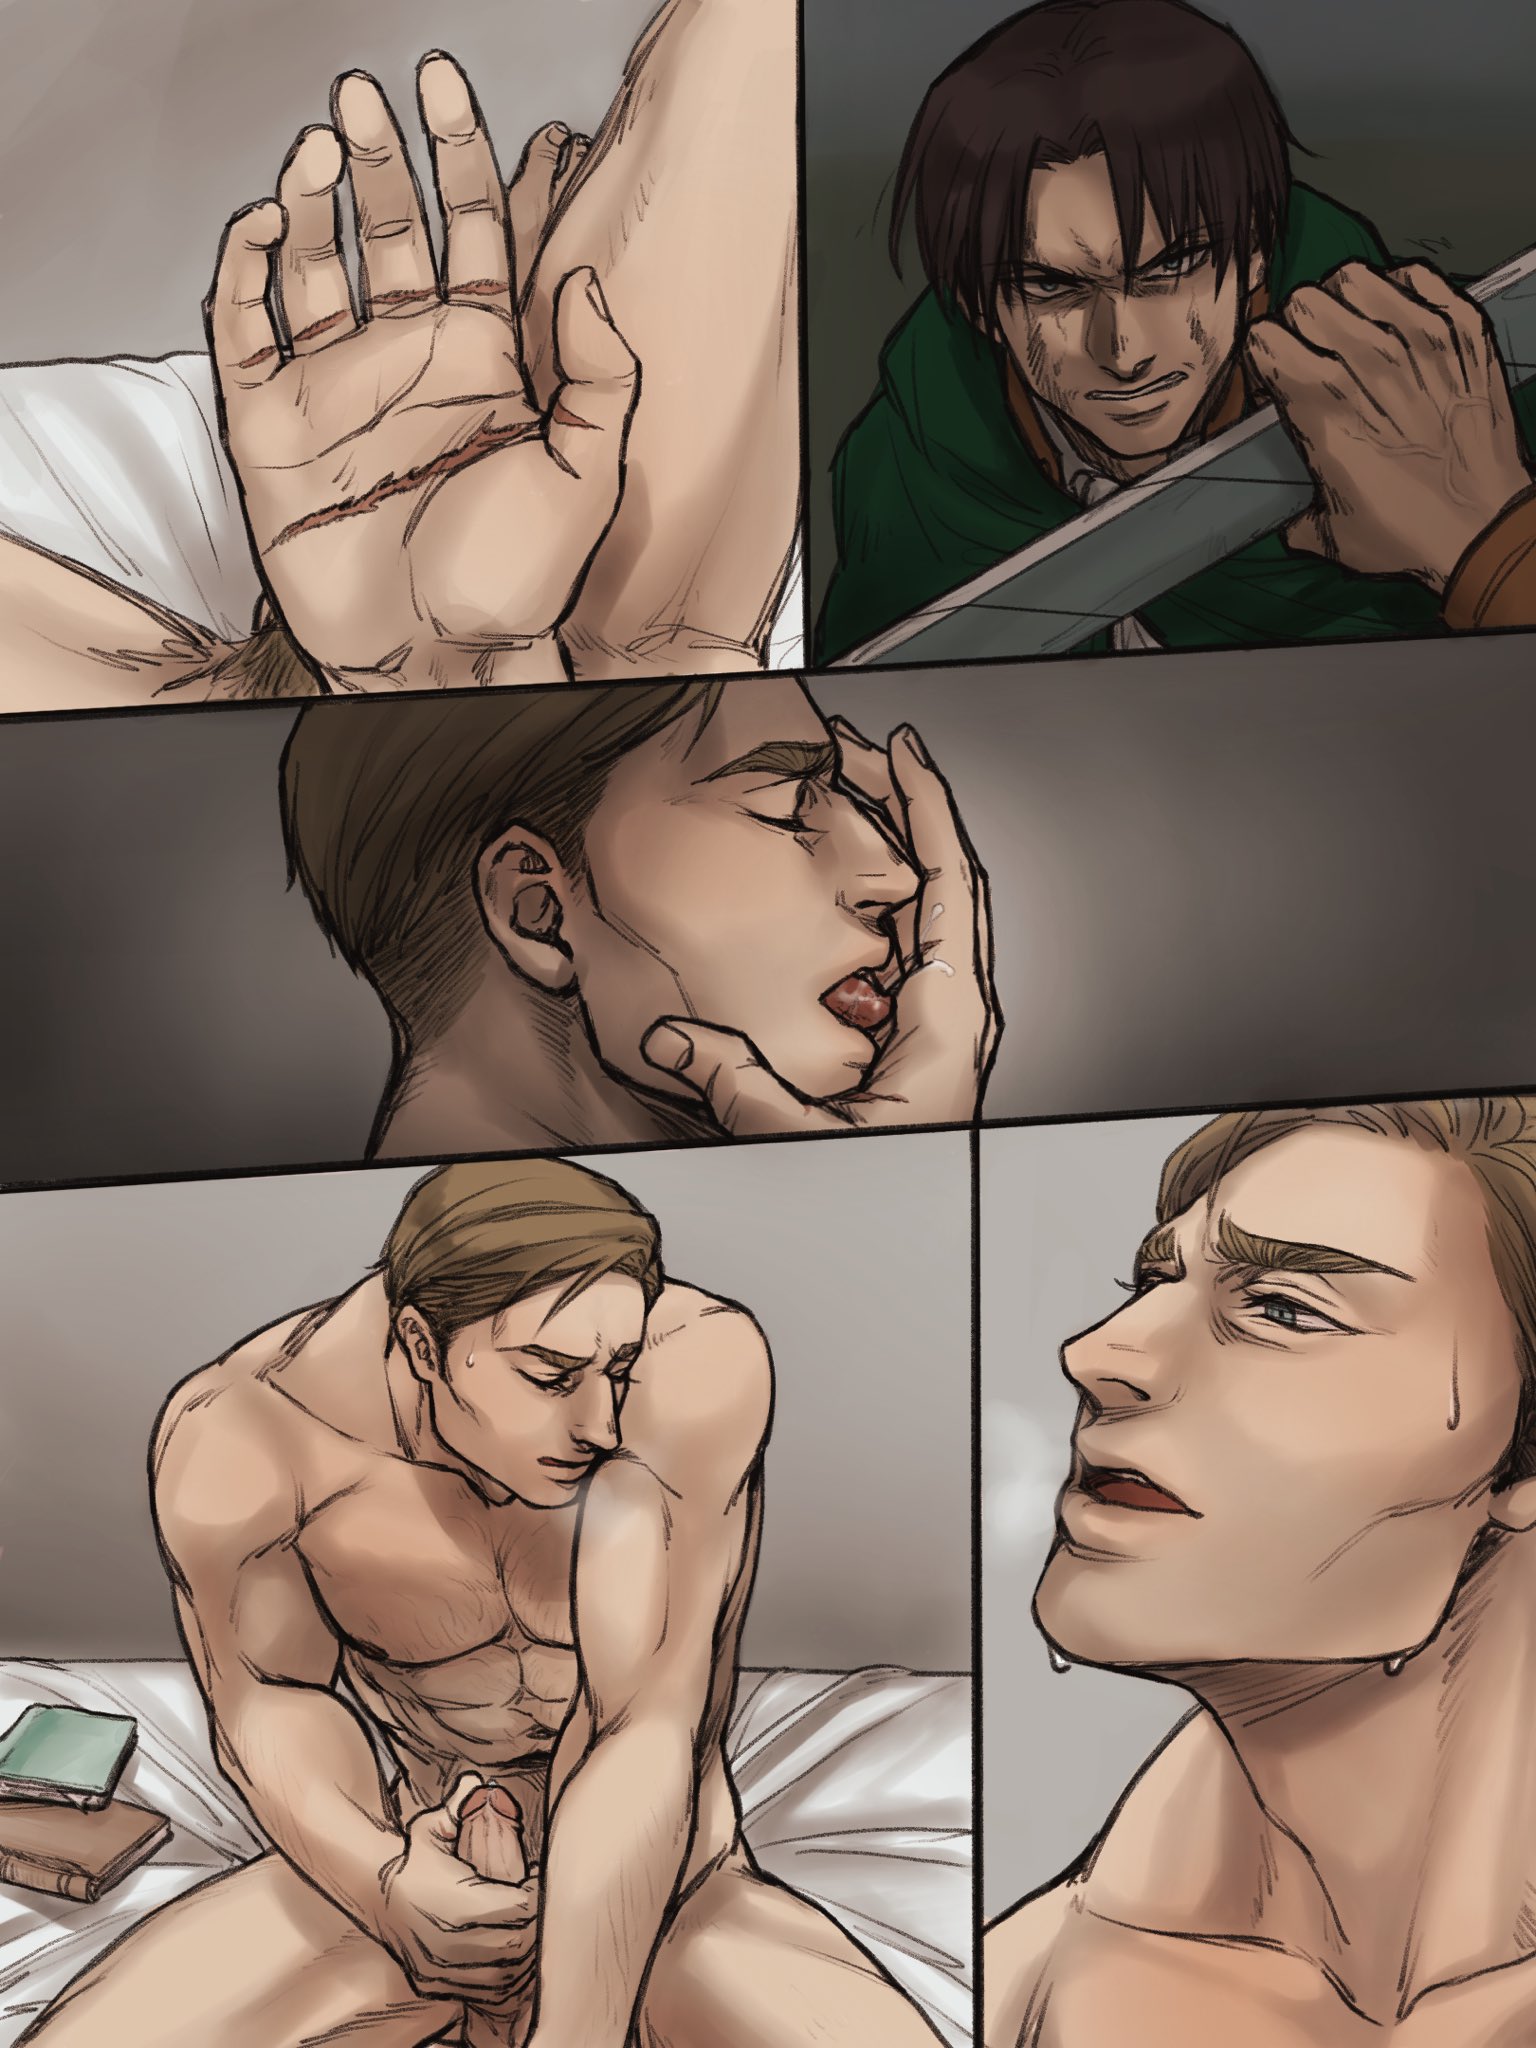 Attack On Titan Gay Porn - Erwin X Levi Attack On Titan Gay Porn | Sex Pictures Pass